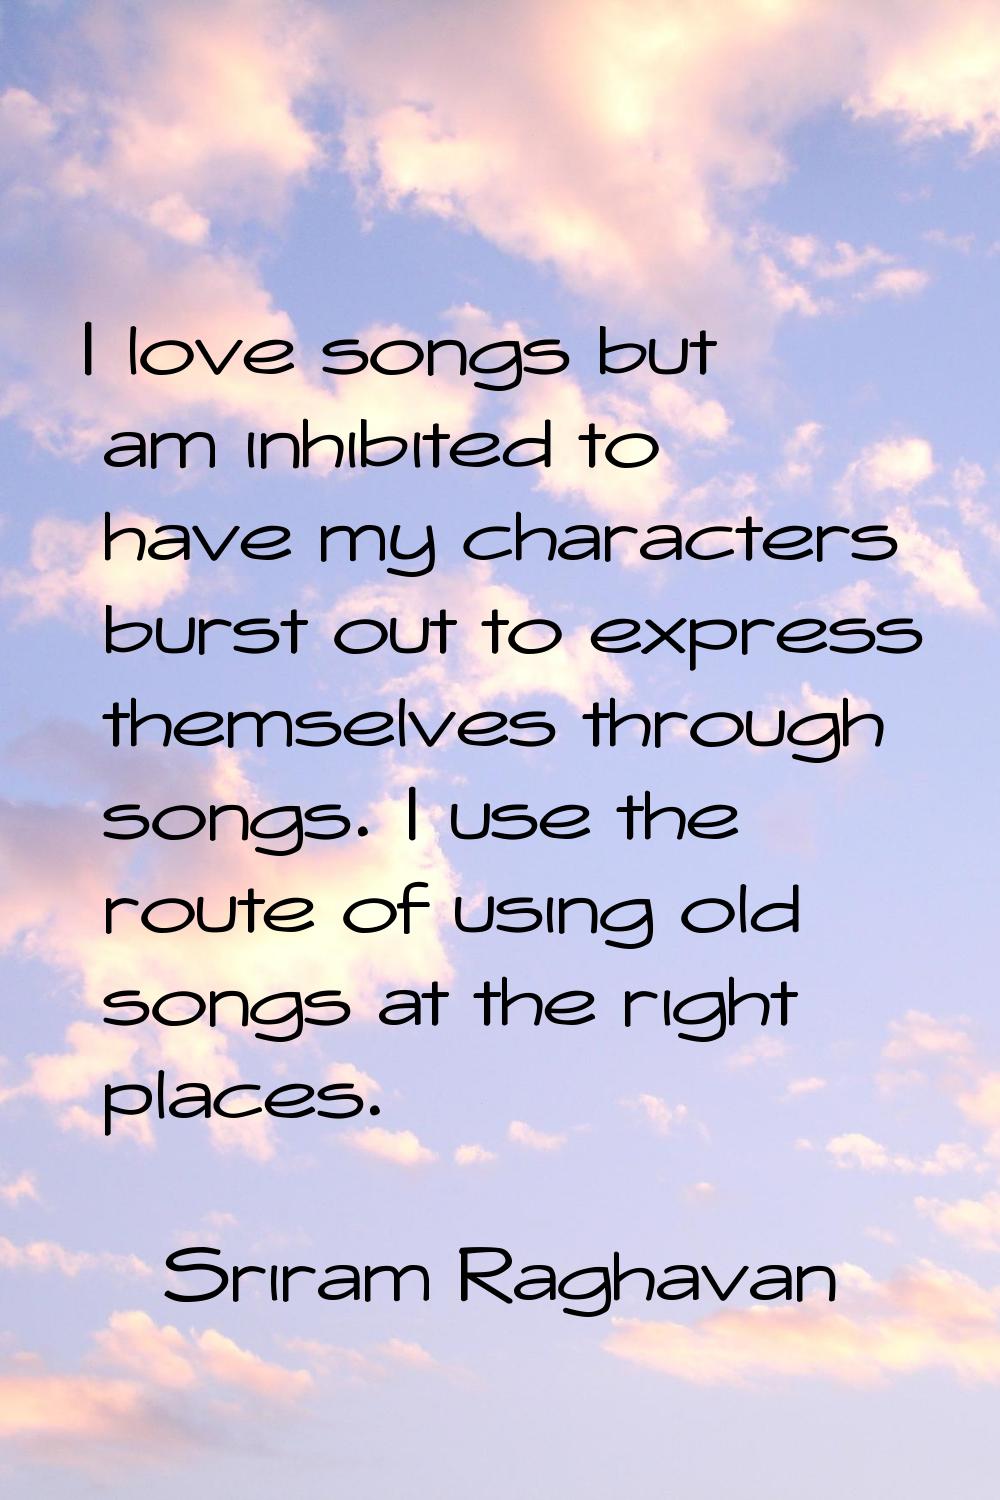 I love songs but am inhibited to have my characters burst out to express themselves through songs. 